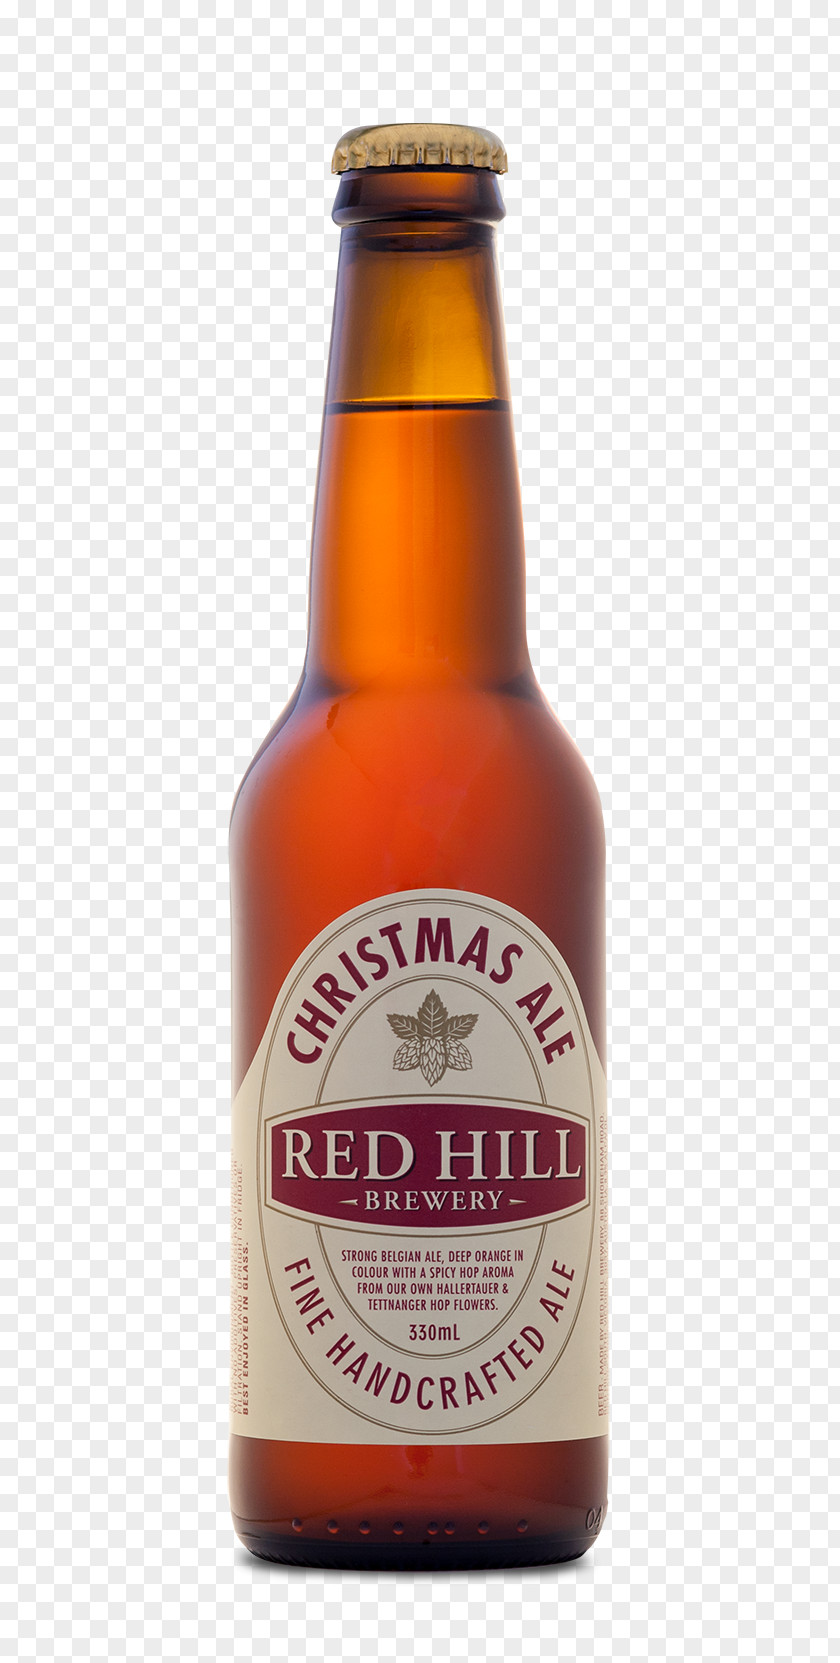 Beer Ale Red Hill Brewery Bottle Lager PNG